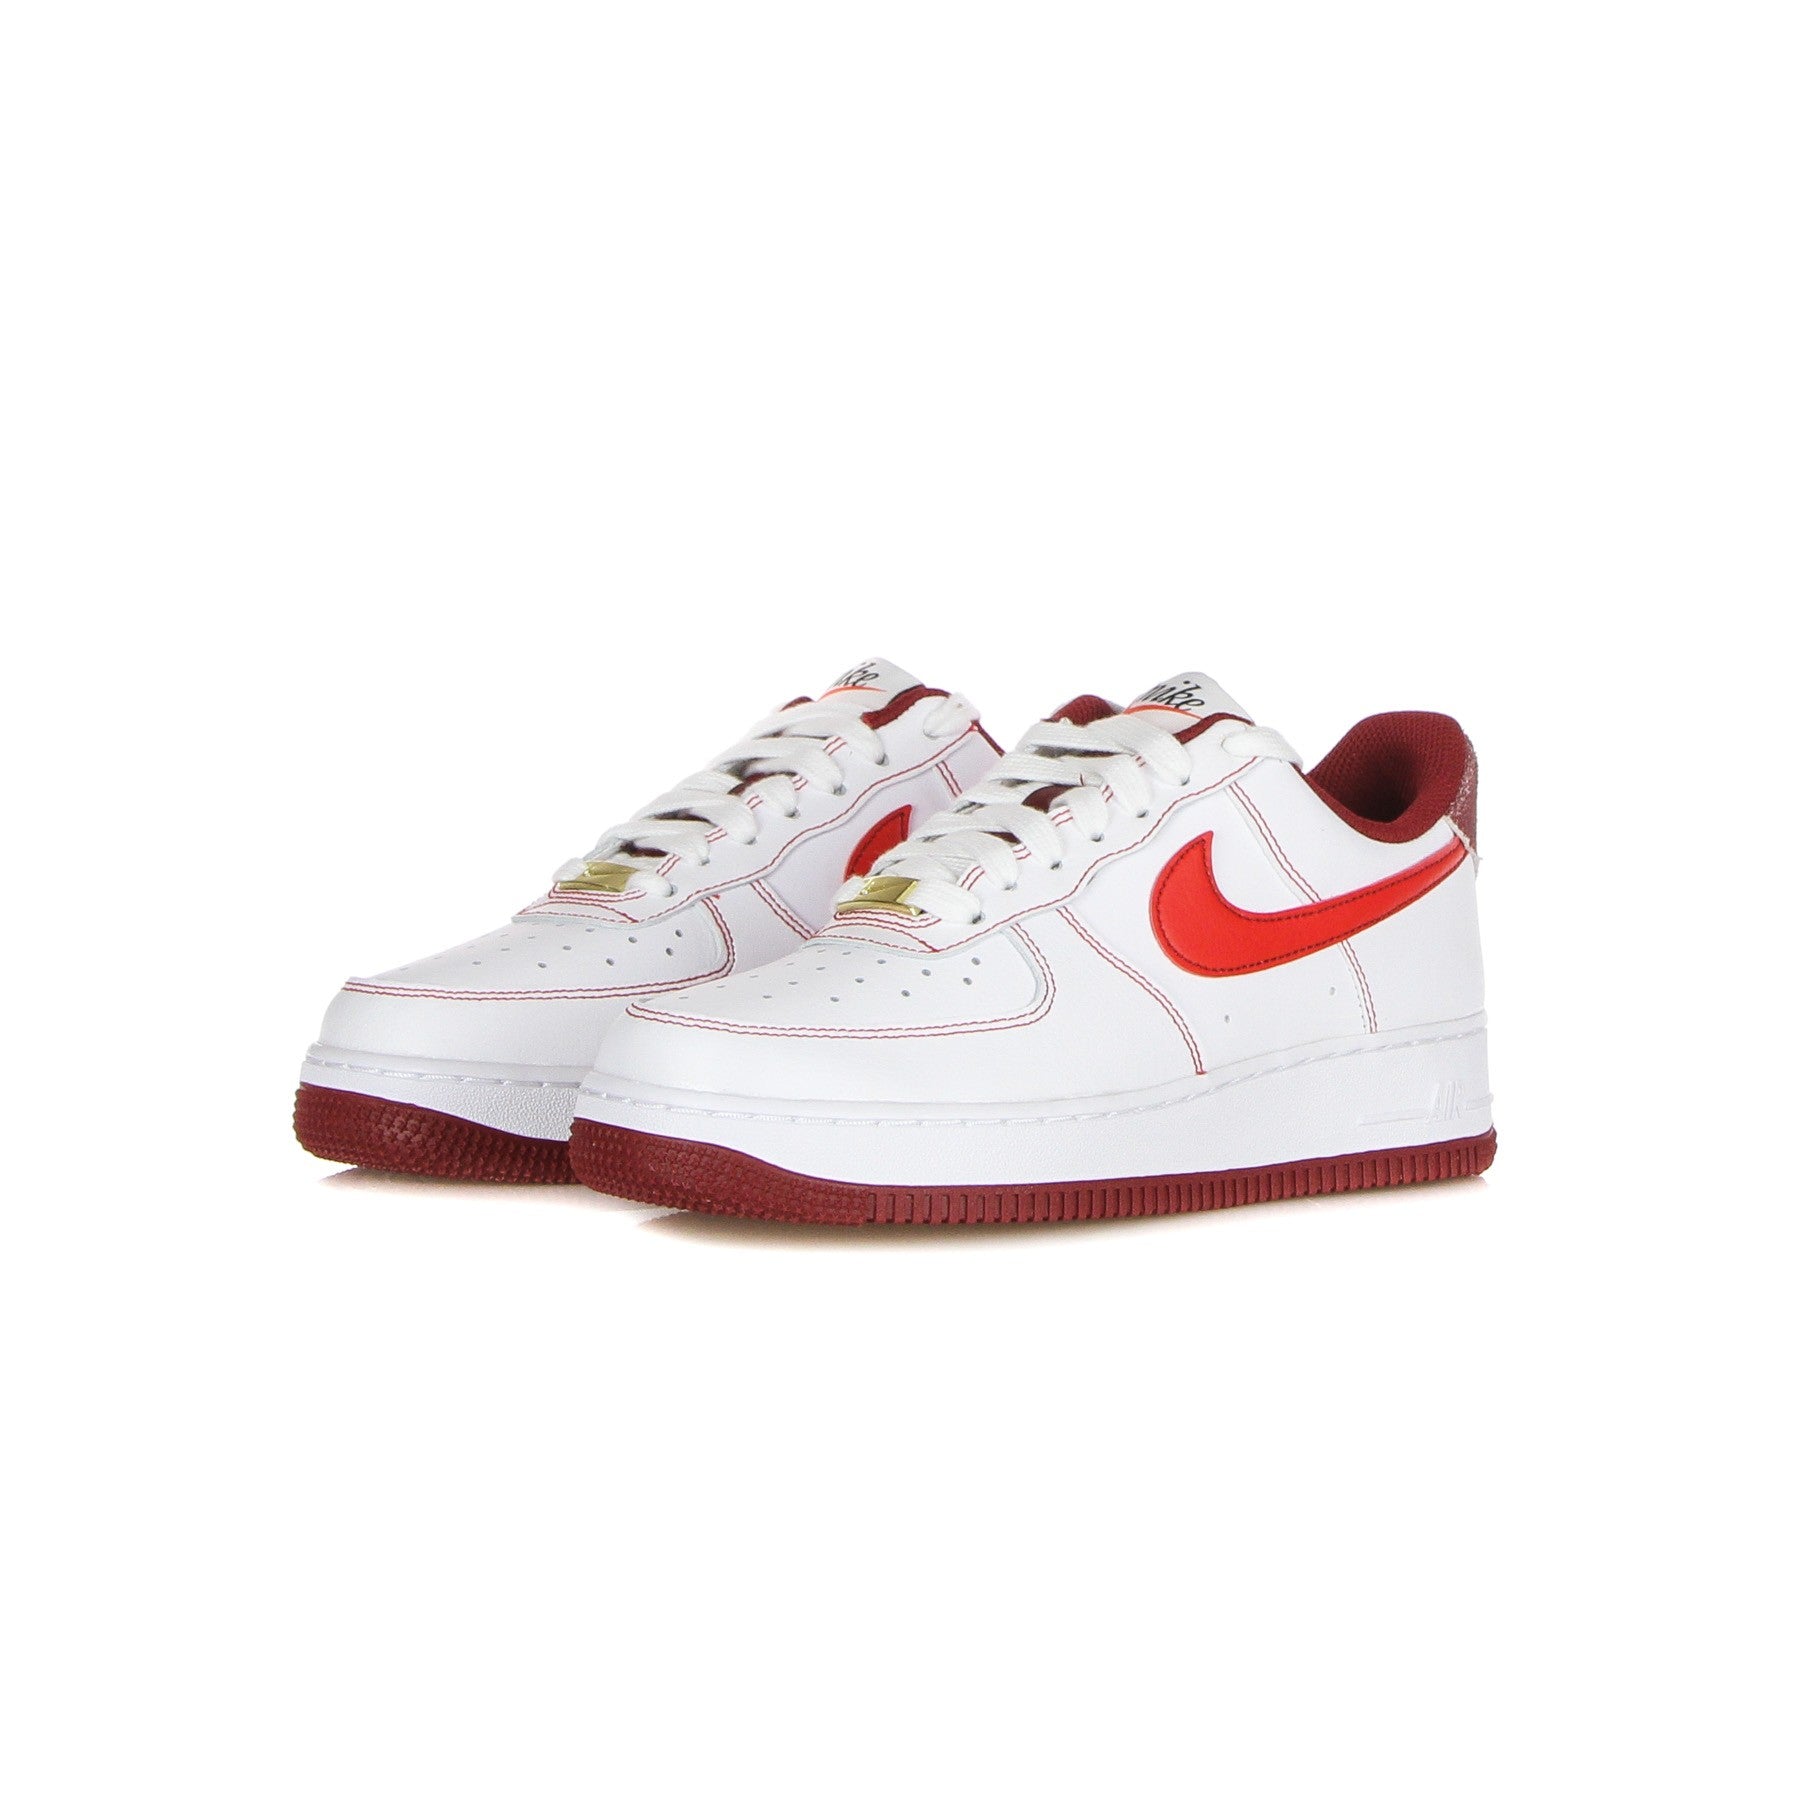 Air Force 1 '07 Men's Low Shoe White/university Red/team Red/sail